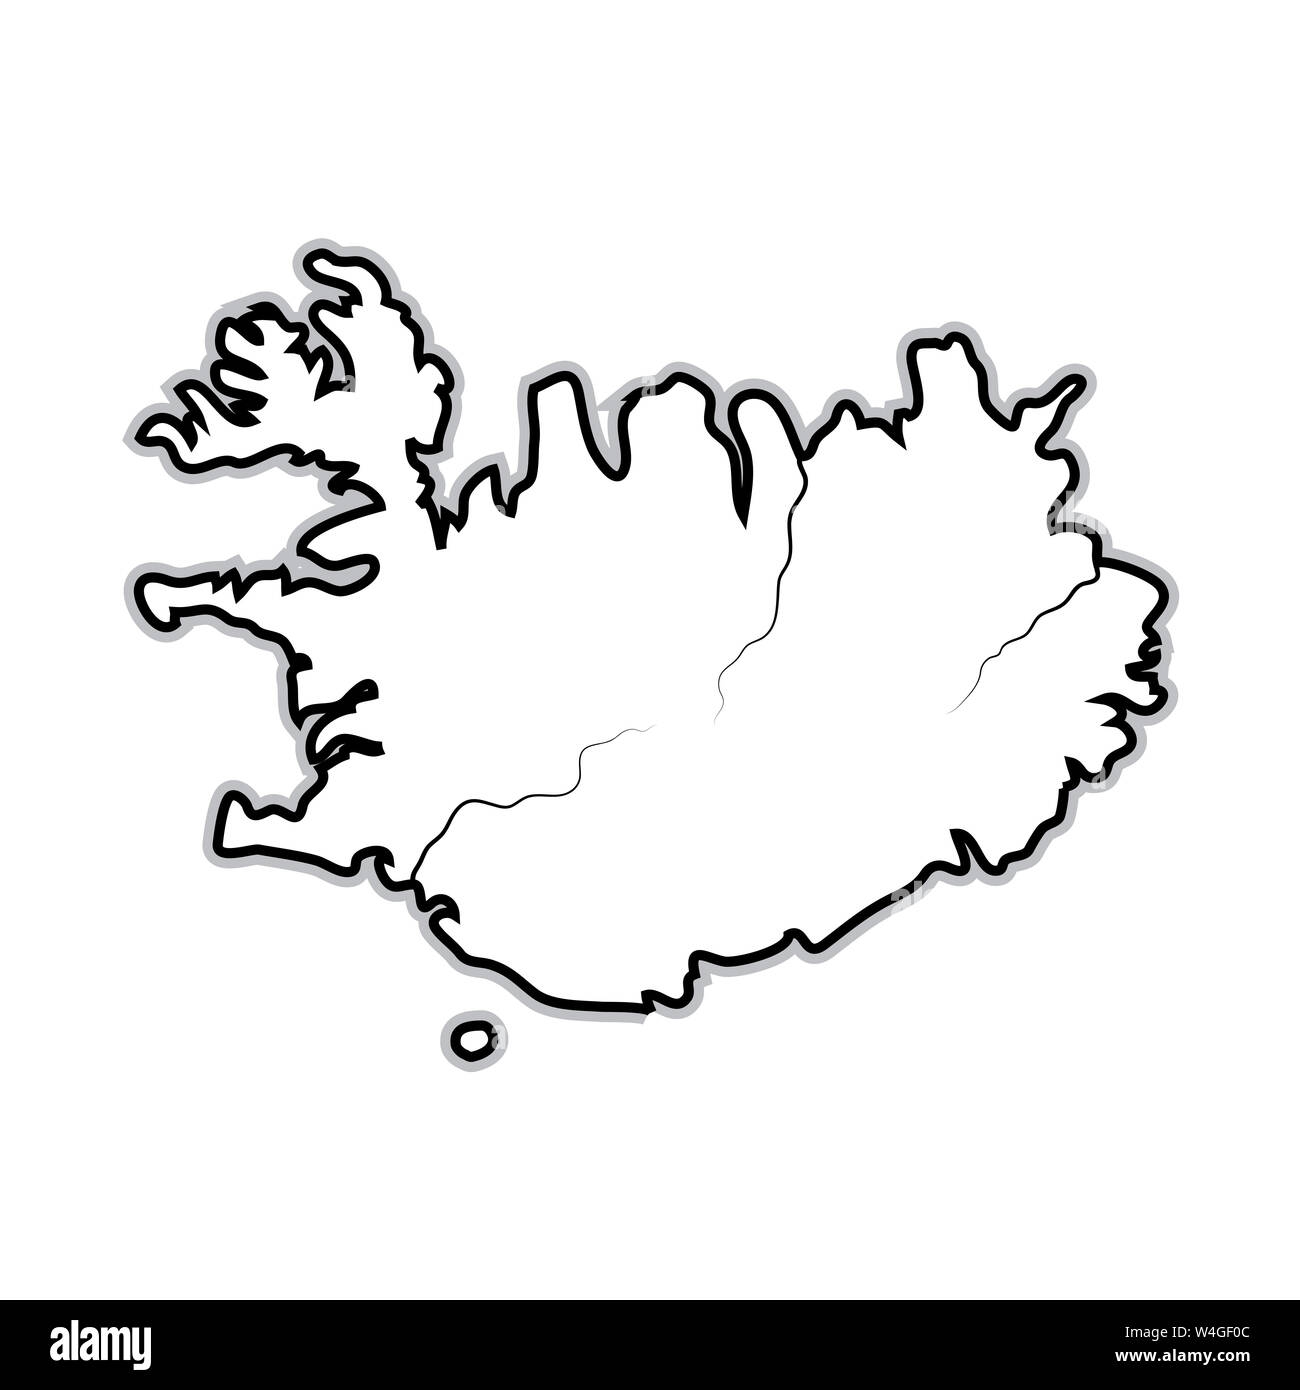 World Map of ICELAND: Iceland, Scandinavia, North Europe, Atlantic Ocean. Geographic chart with oceanic coastline and island. Stock Photo